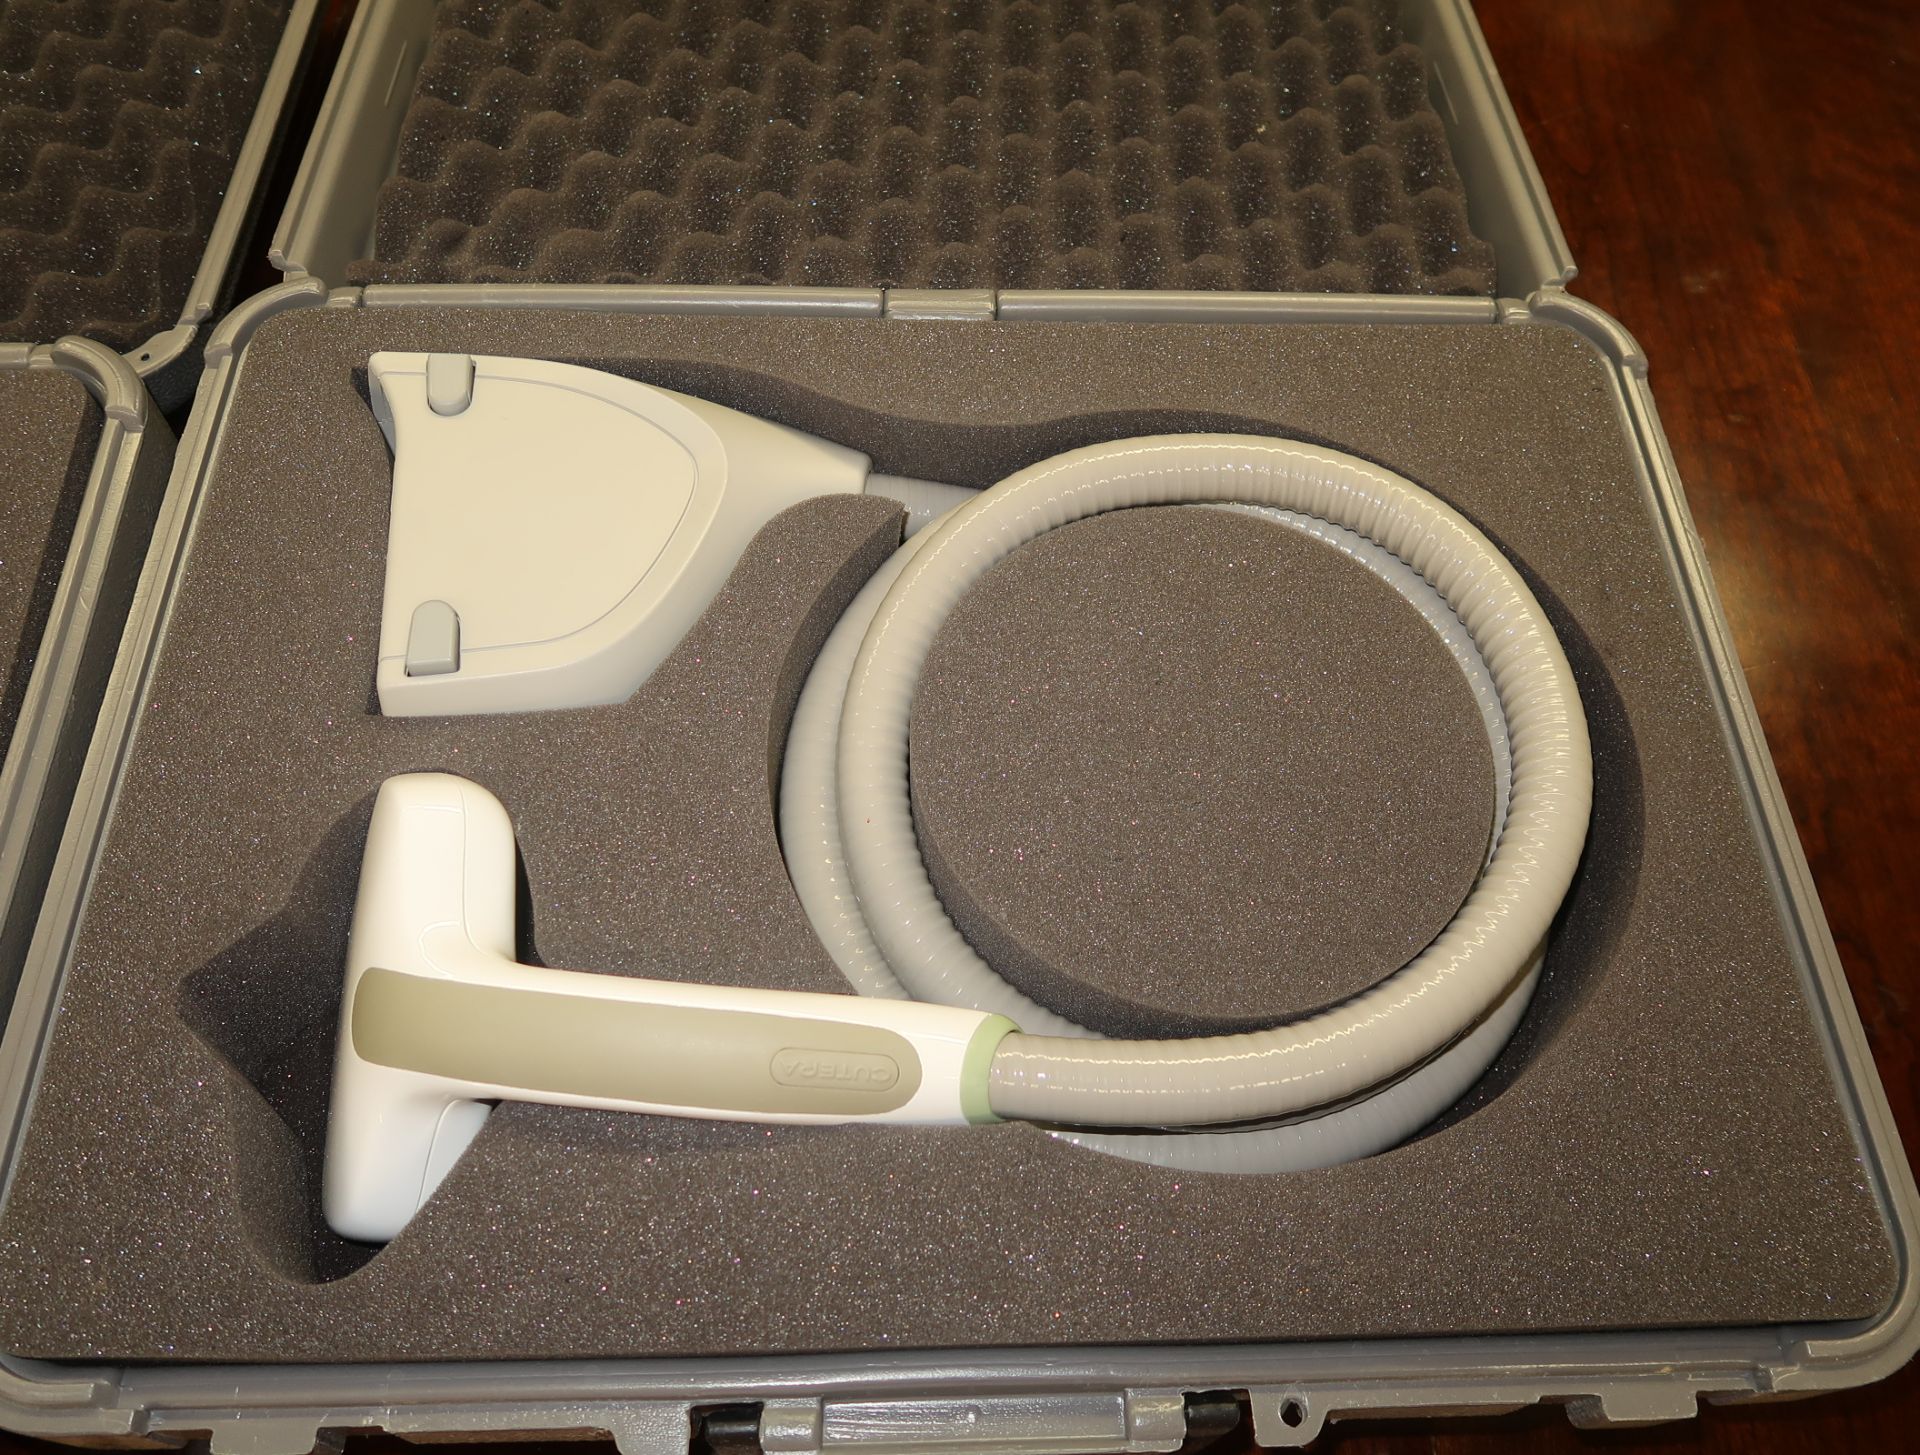 CUTERA XEO LASER, MANUFACTURED FEB. 2015, SN. XP15943 W/ PROWAVE LX & LIMELIGHT HAND PIECES. - Image 7 of 9